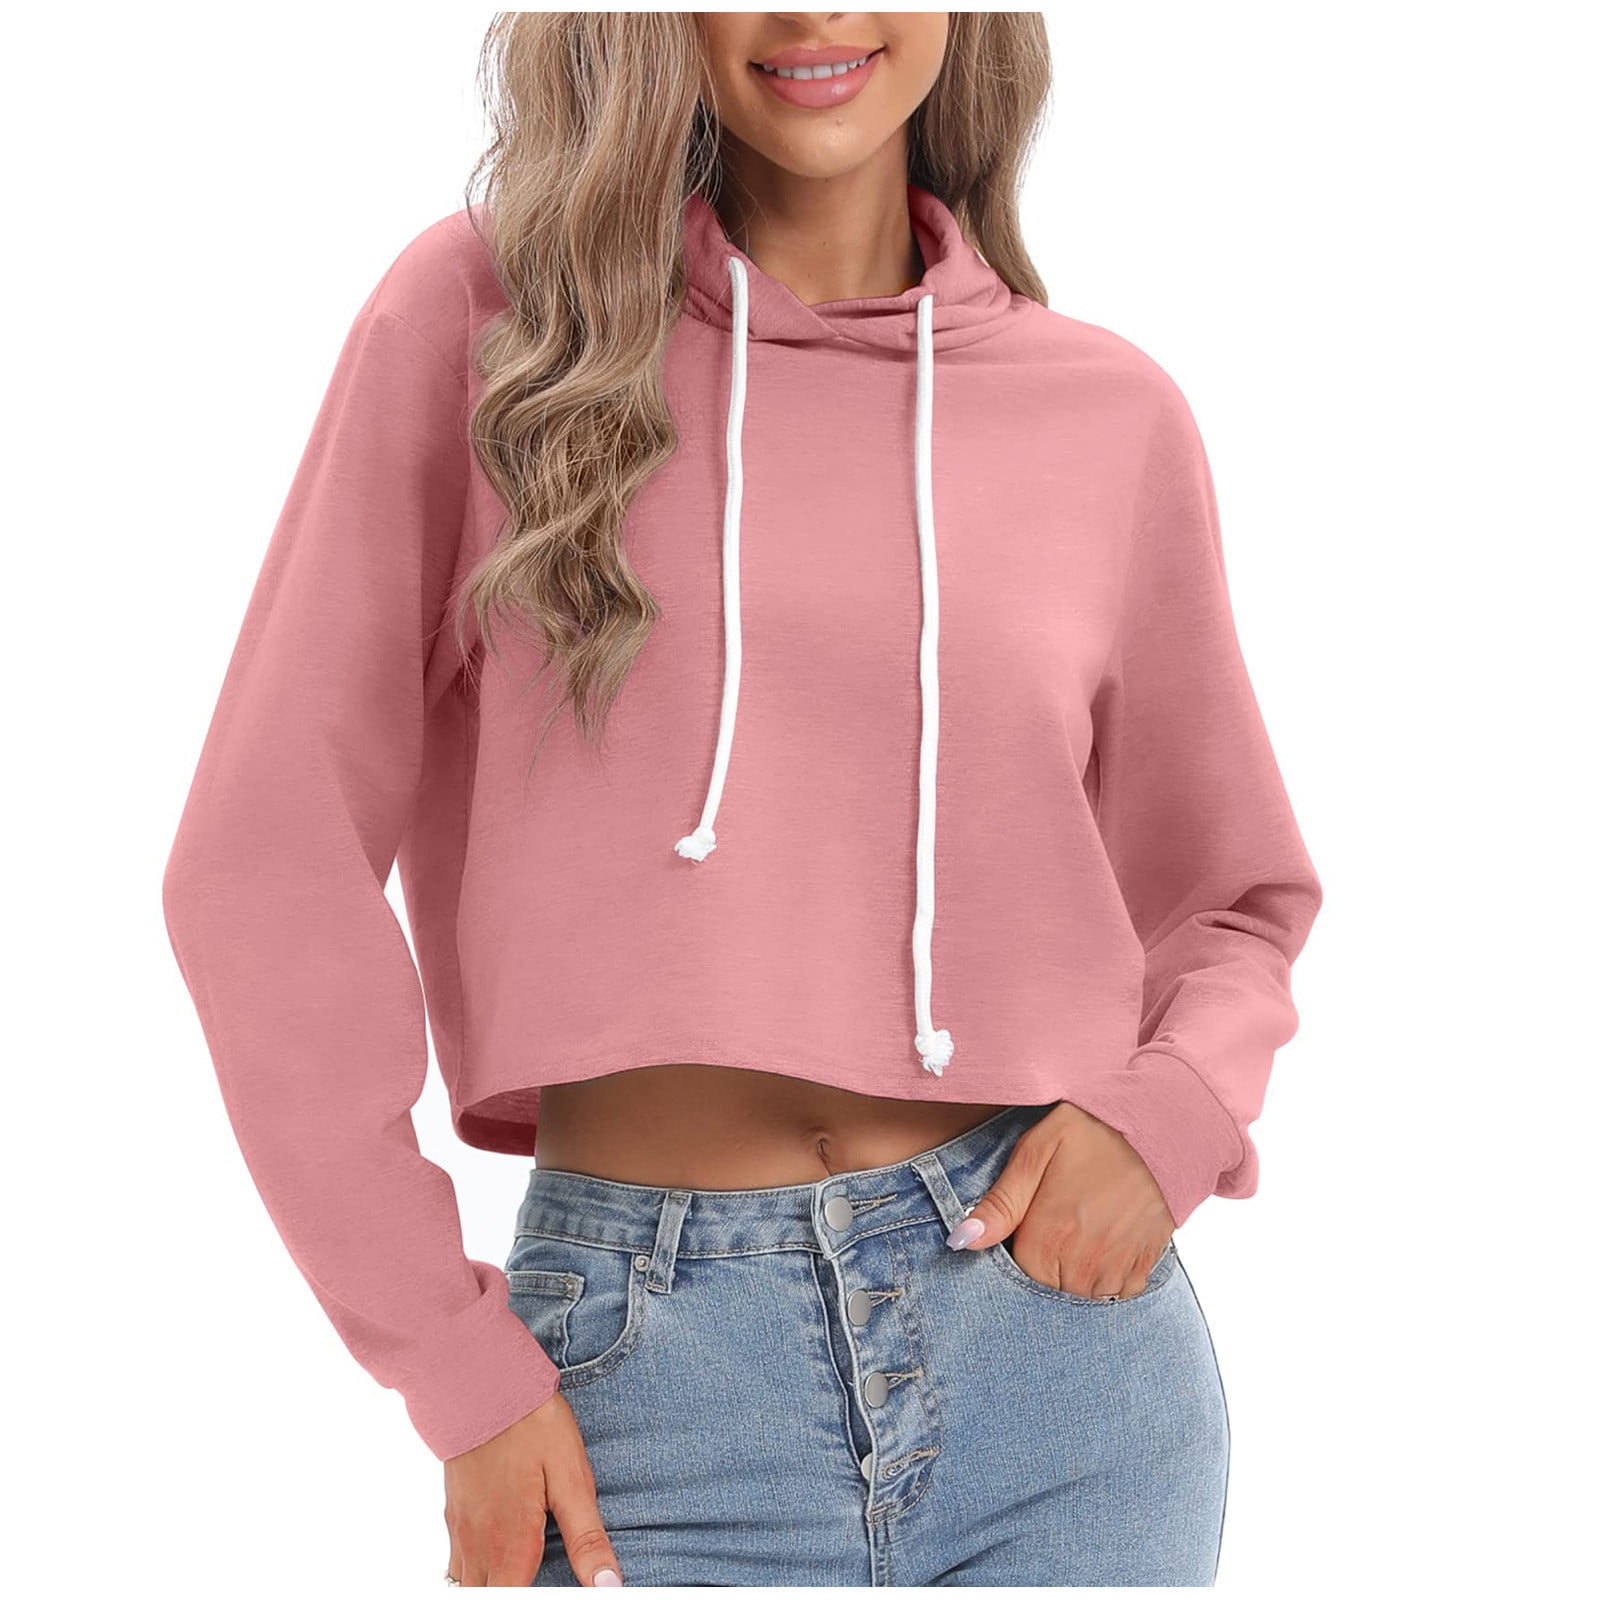 cllios Crop Hoodies for Women Solid Long Sleeve Hooded Sweatshirt Top  Workout Drawstring Jogger Pullover 